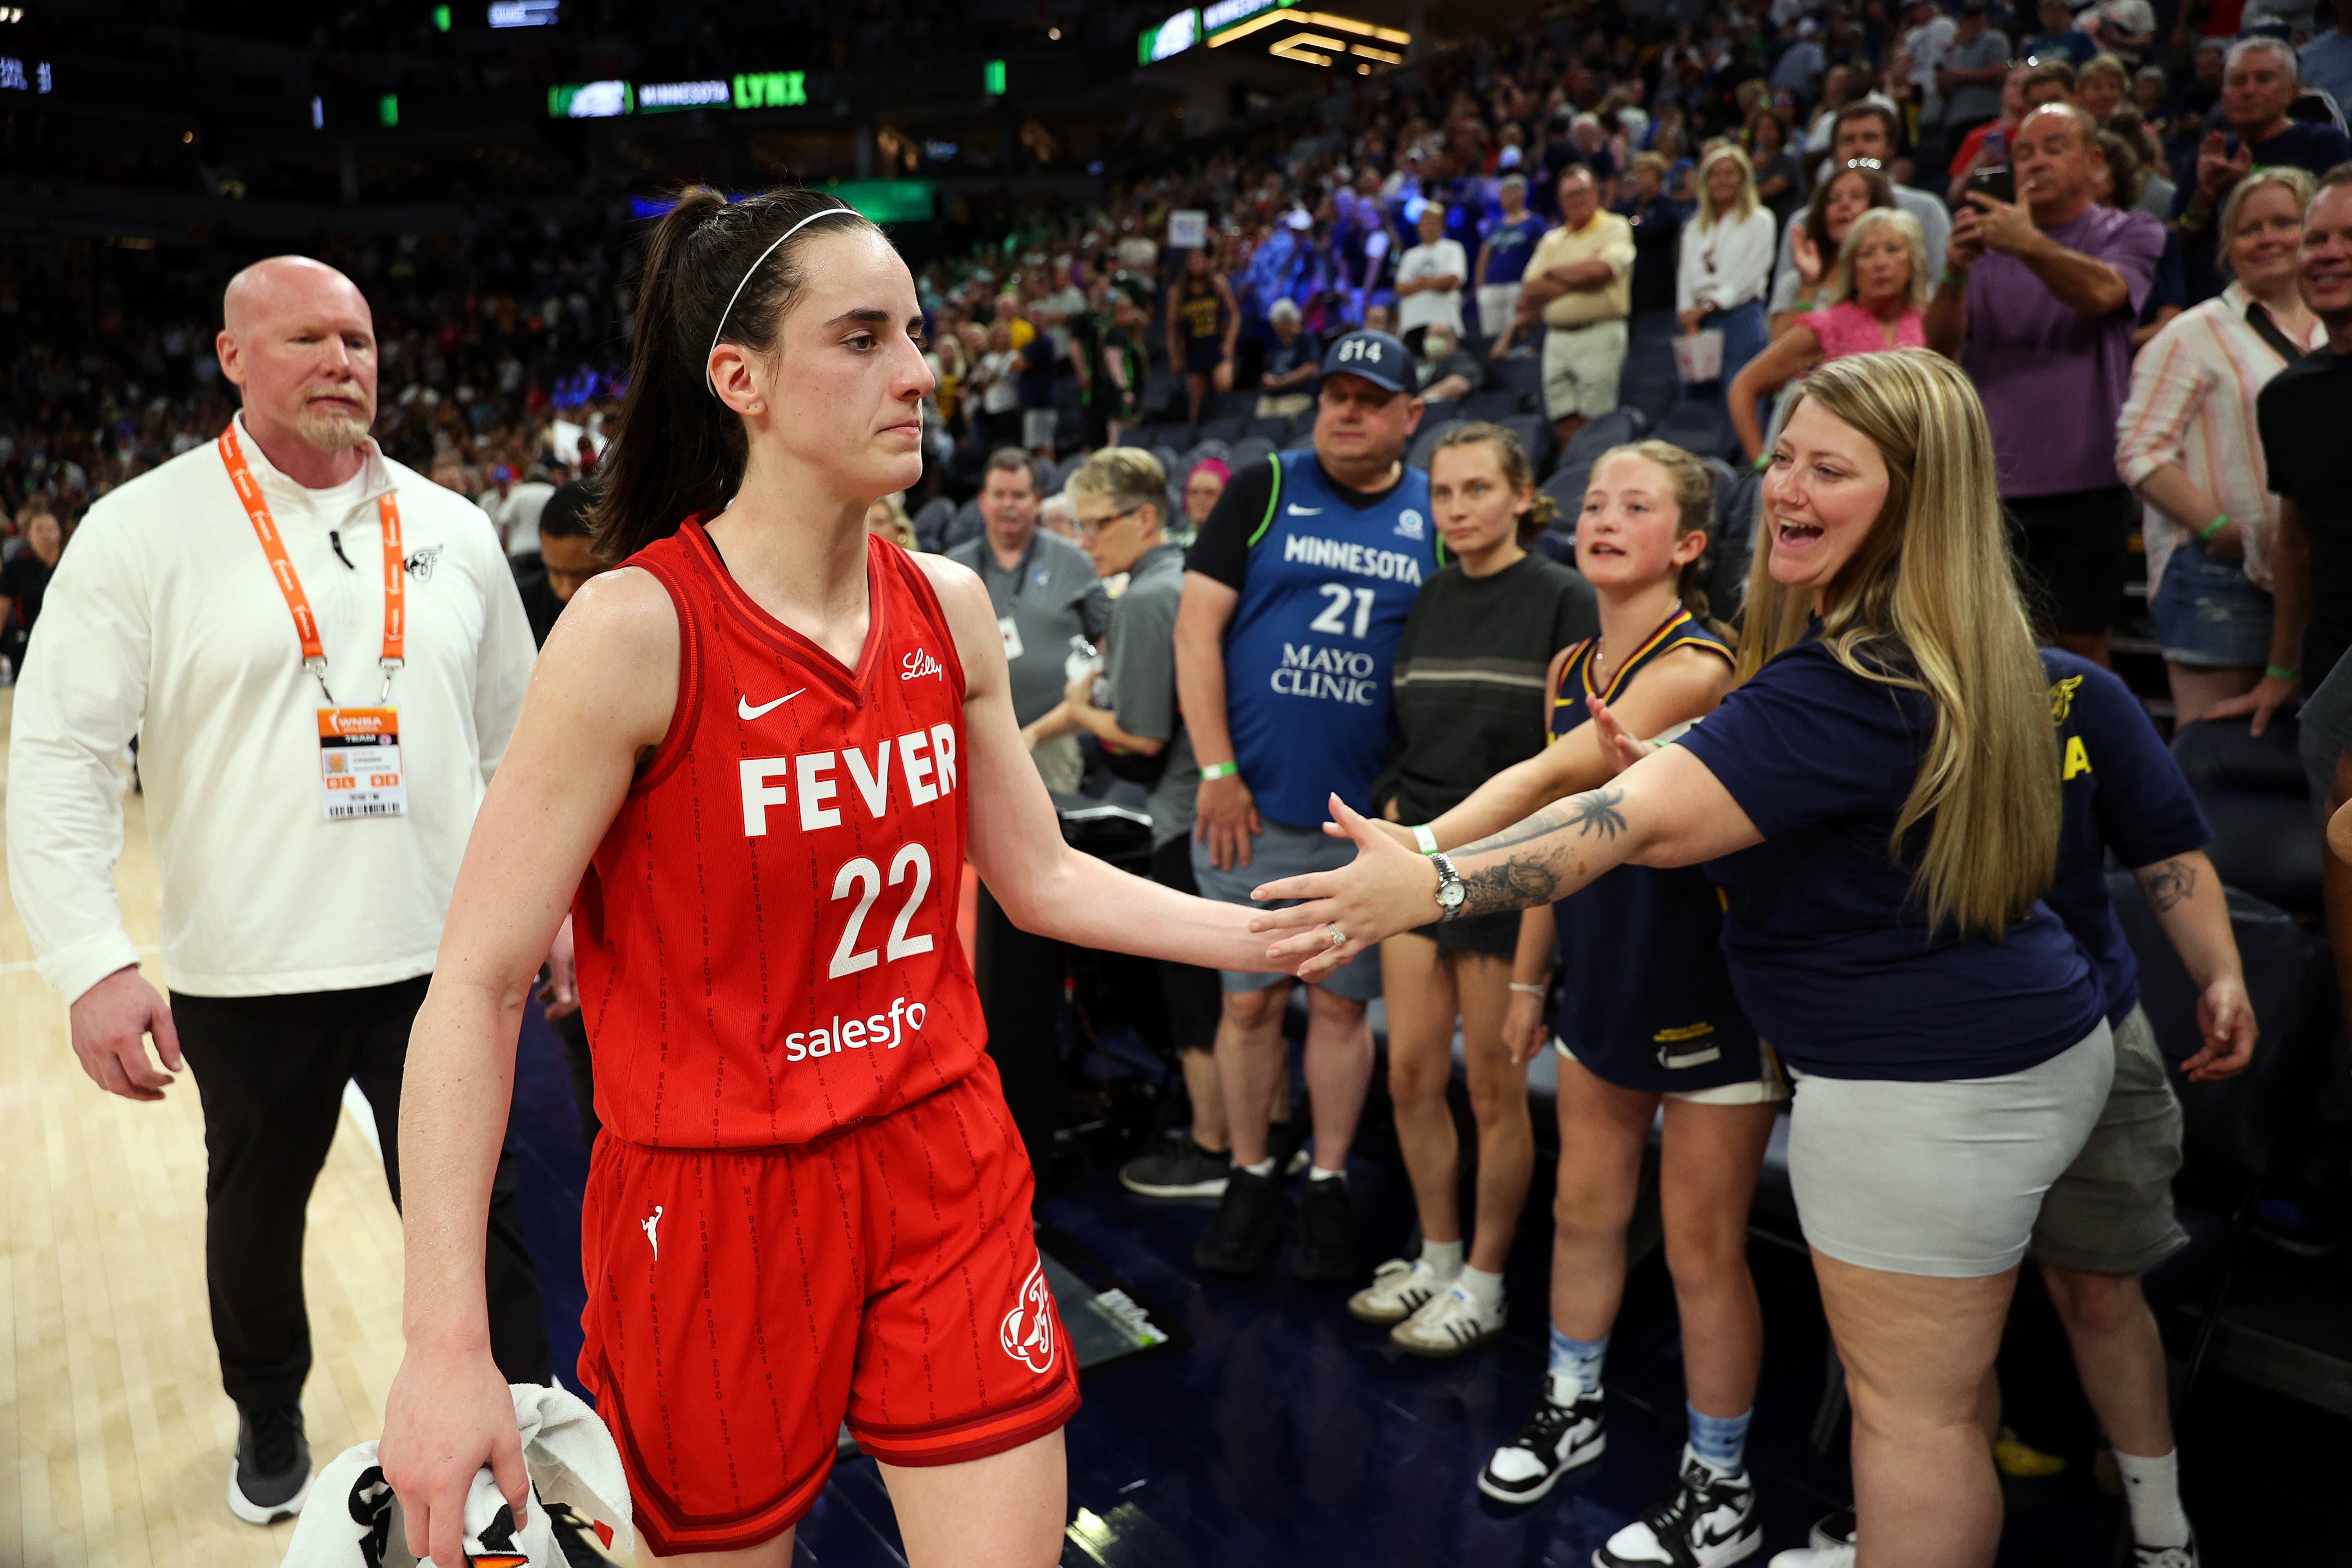 Fever upend 1st-place Lynx in Minnesota as fans show out to cheer on Caitlin Clark